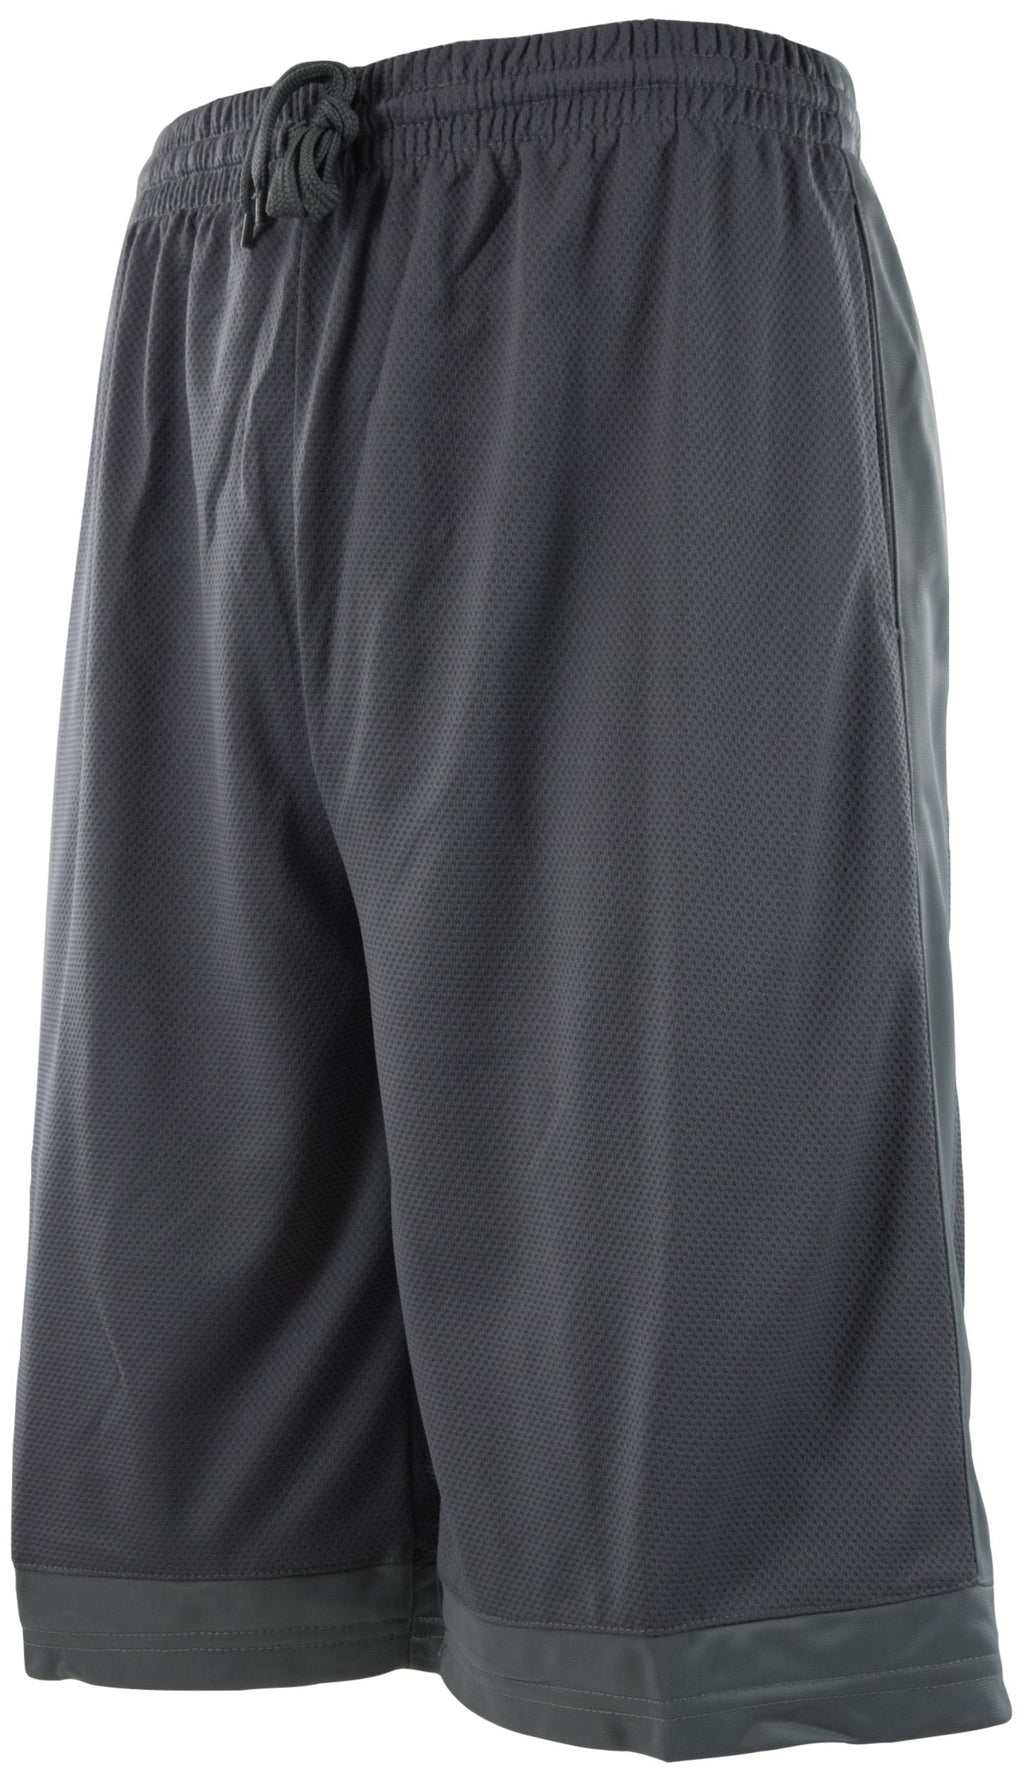 ChoiceApparel Mens Solid Color Basketball Training Shorts with Pockets and Drawstring 1X 309-grey - BeesActive Australia